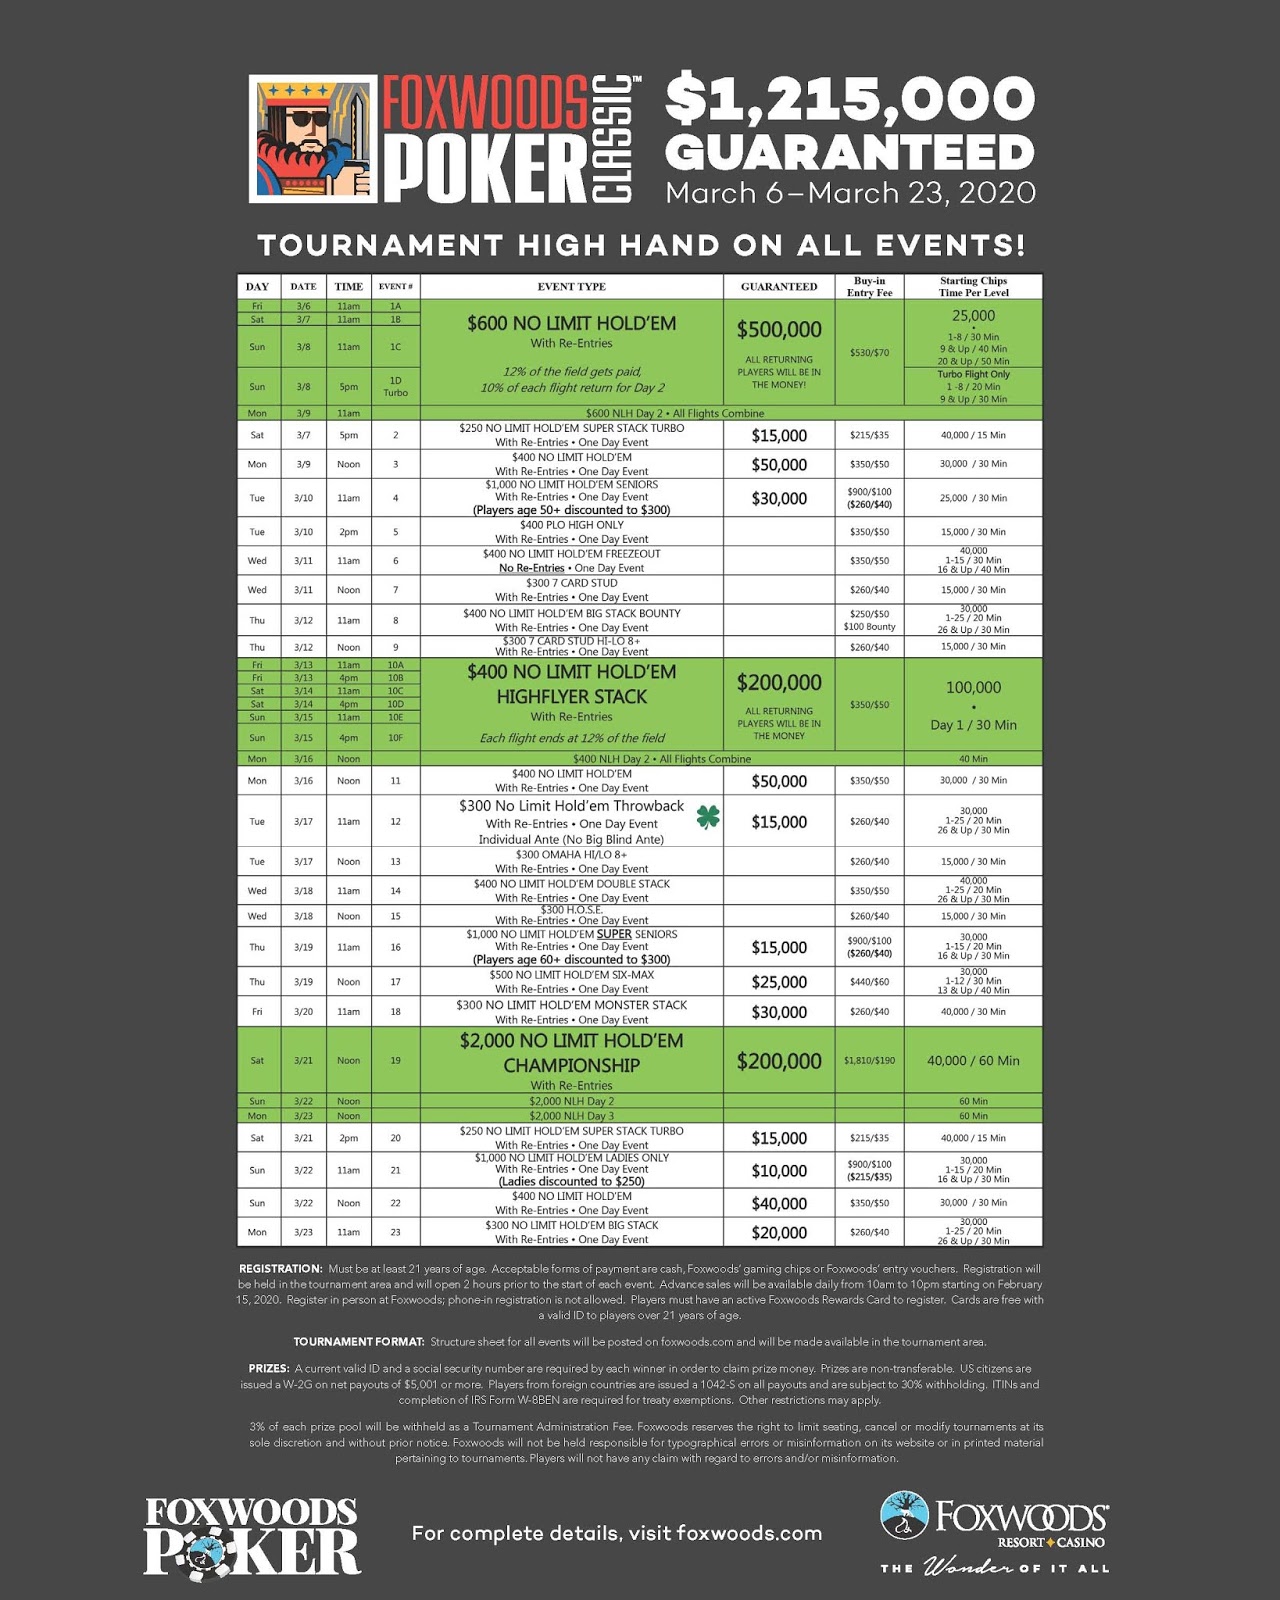 Foxwoods Poker Check Out the Full Foxwoods Poker Classic Schedule With